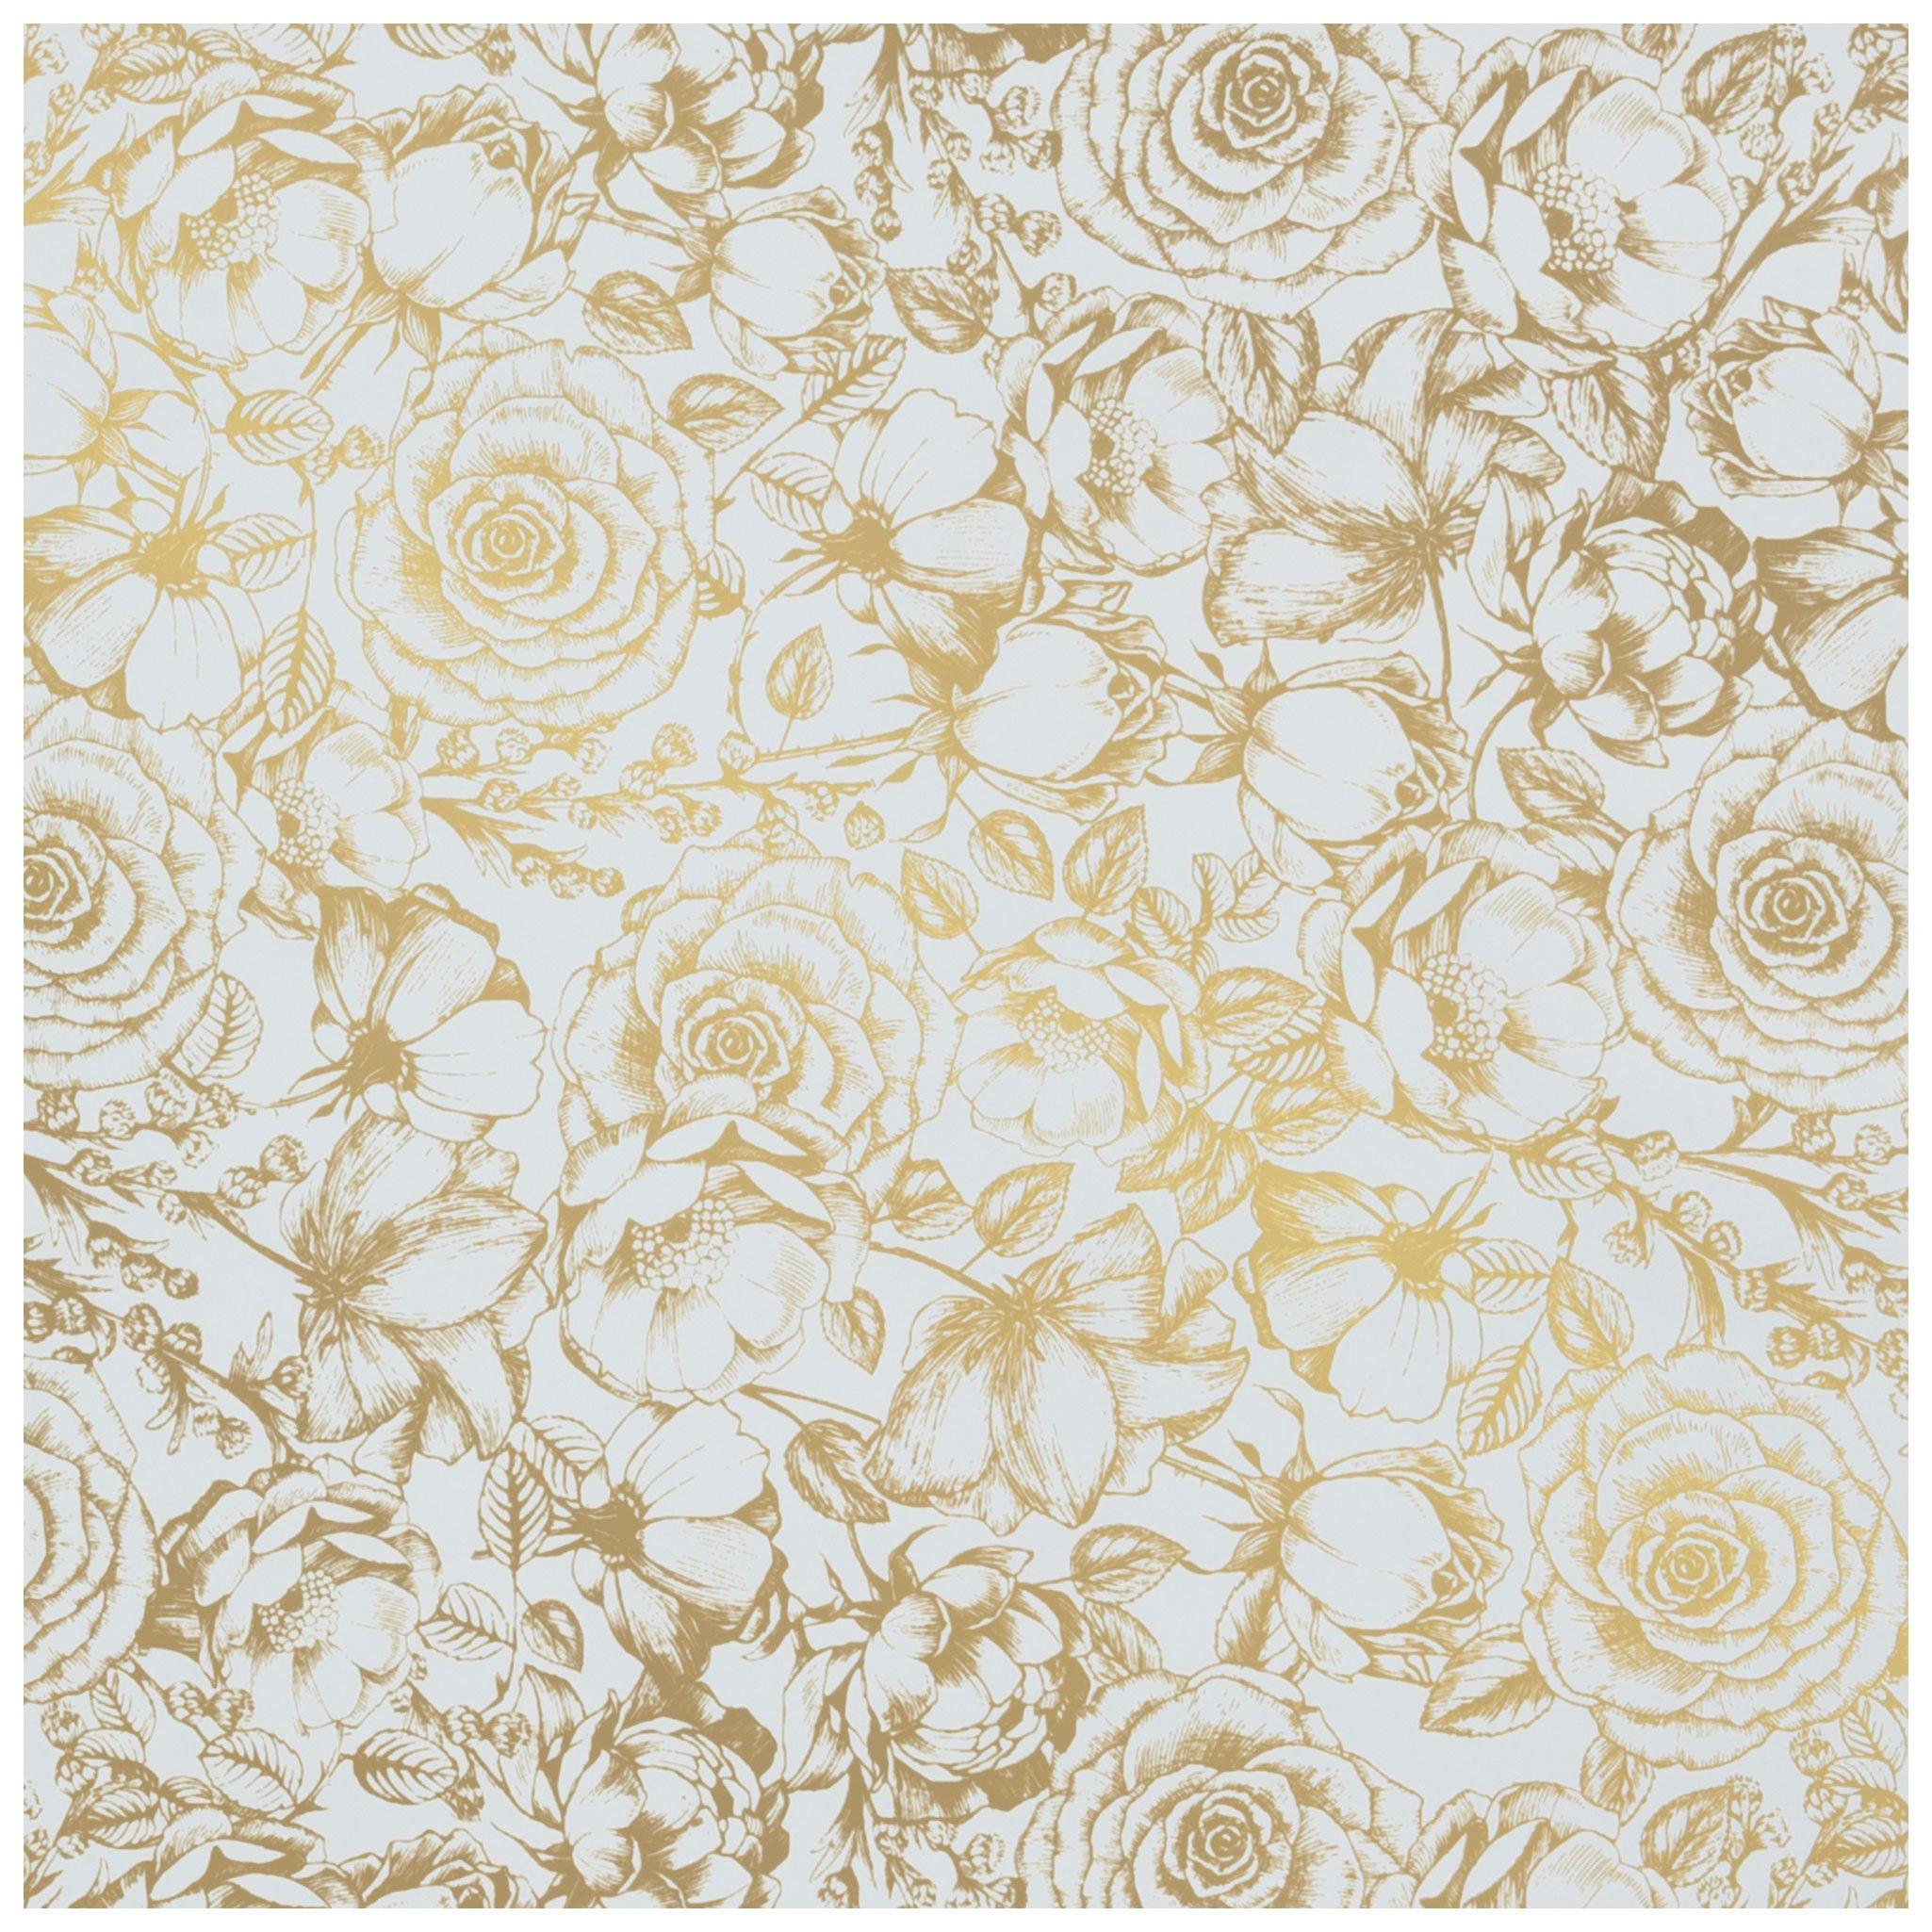 White & Gold Floral Gift Wrap, Hobby Lobby